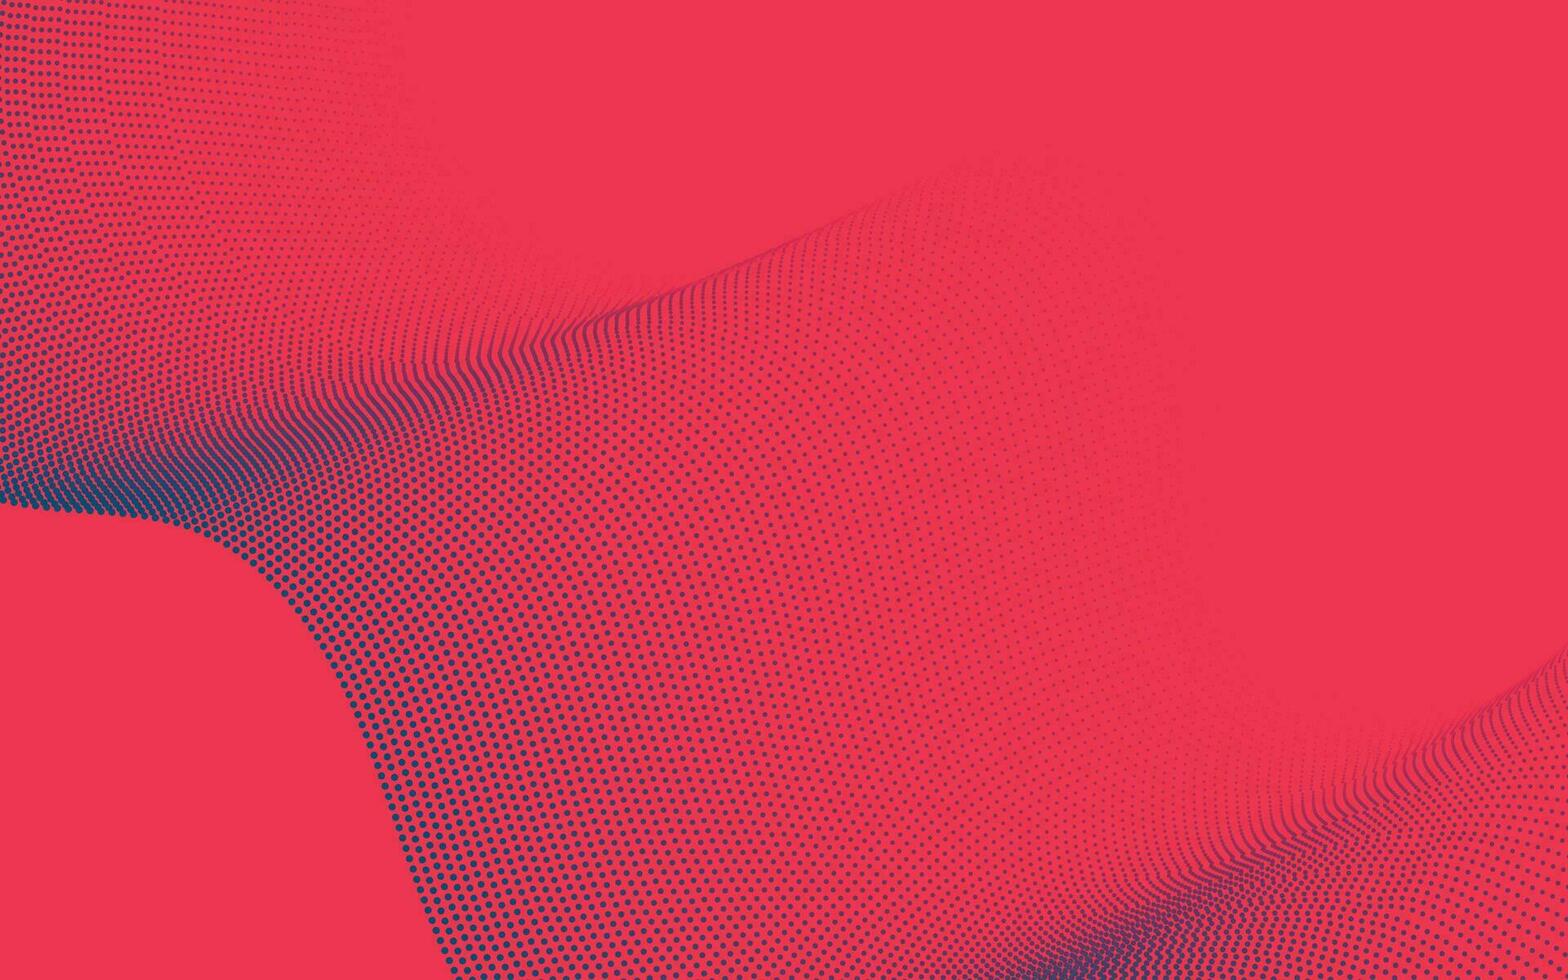 Abstract background with halftone dots. Bright blue waves on a red background. Comic style for website, presentation, banner vector